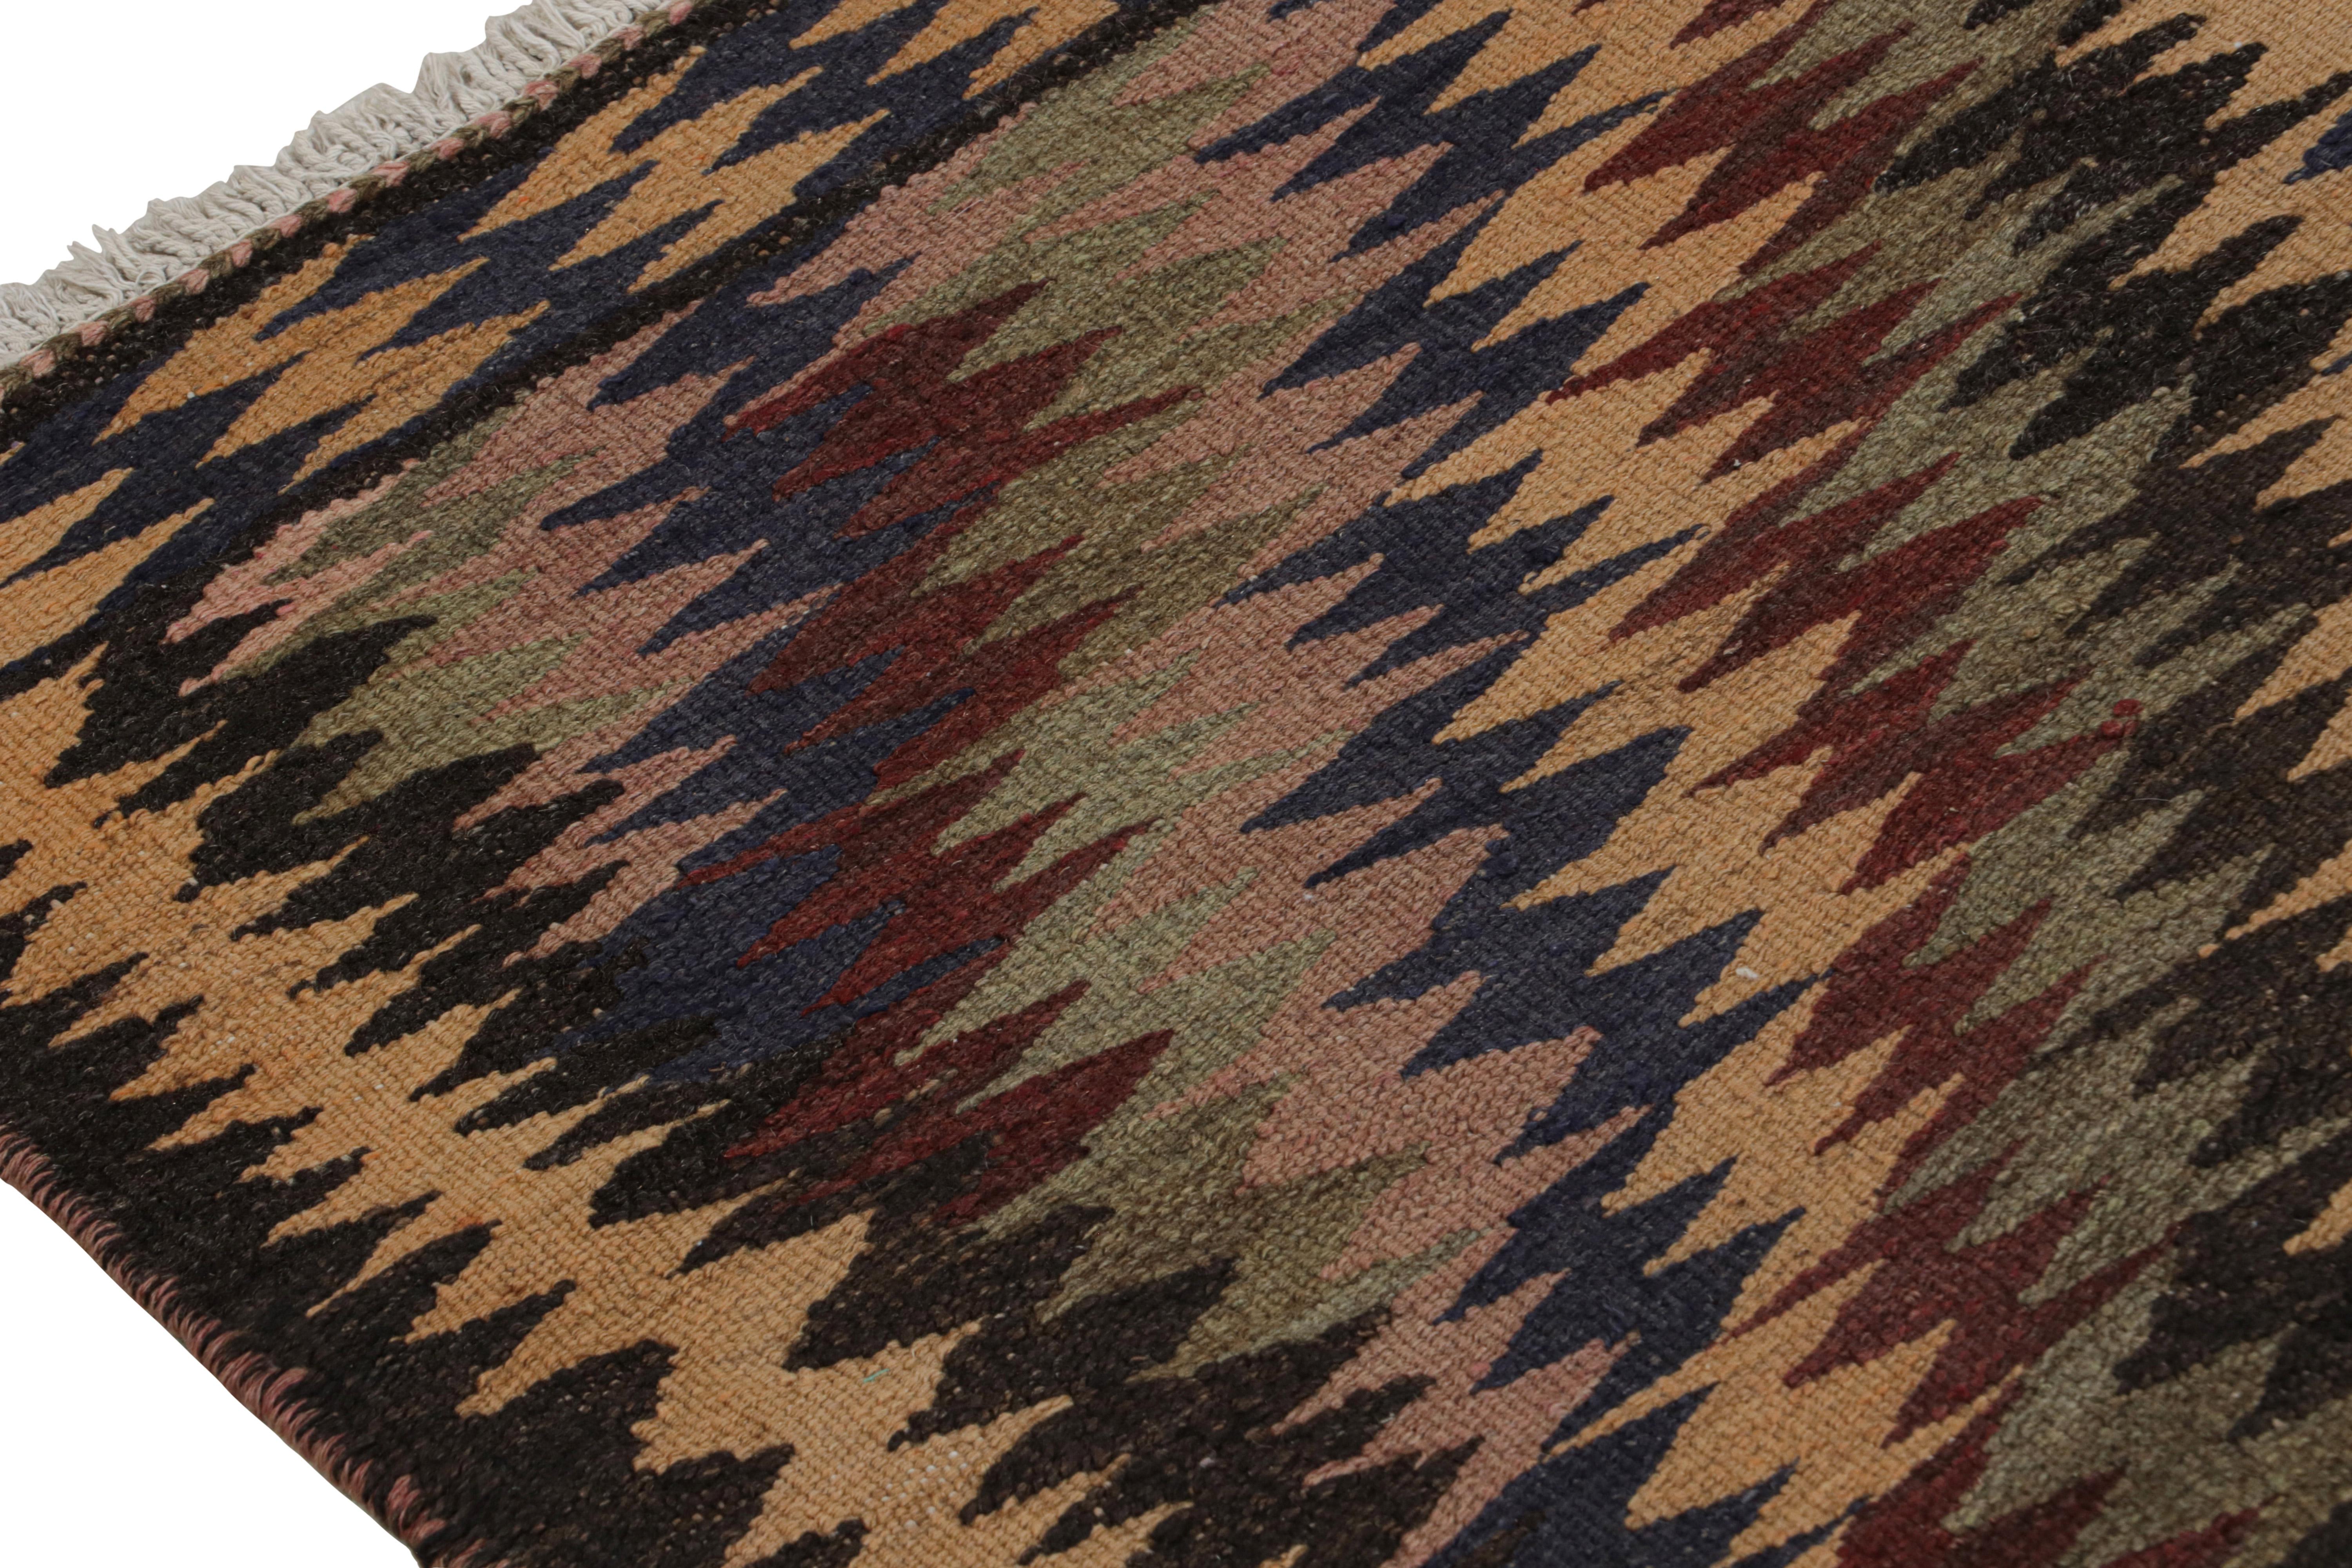 Hand-Woven Vintage Persian Kilim in Polychromatic Patterns, from Rug & Kilim For Sale